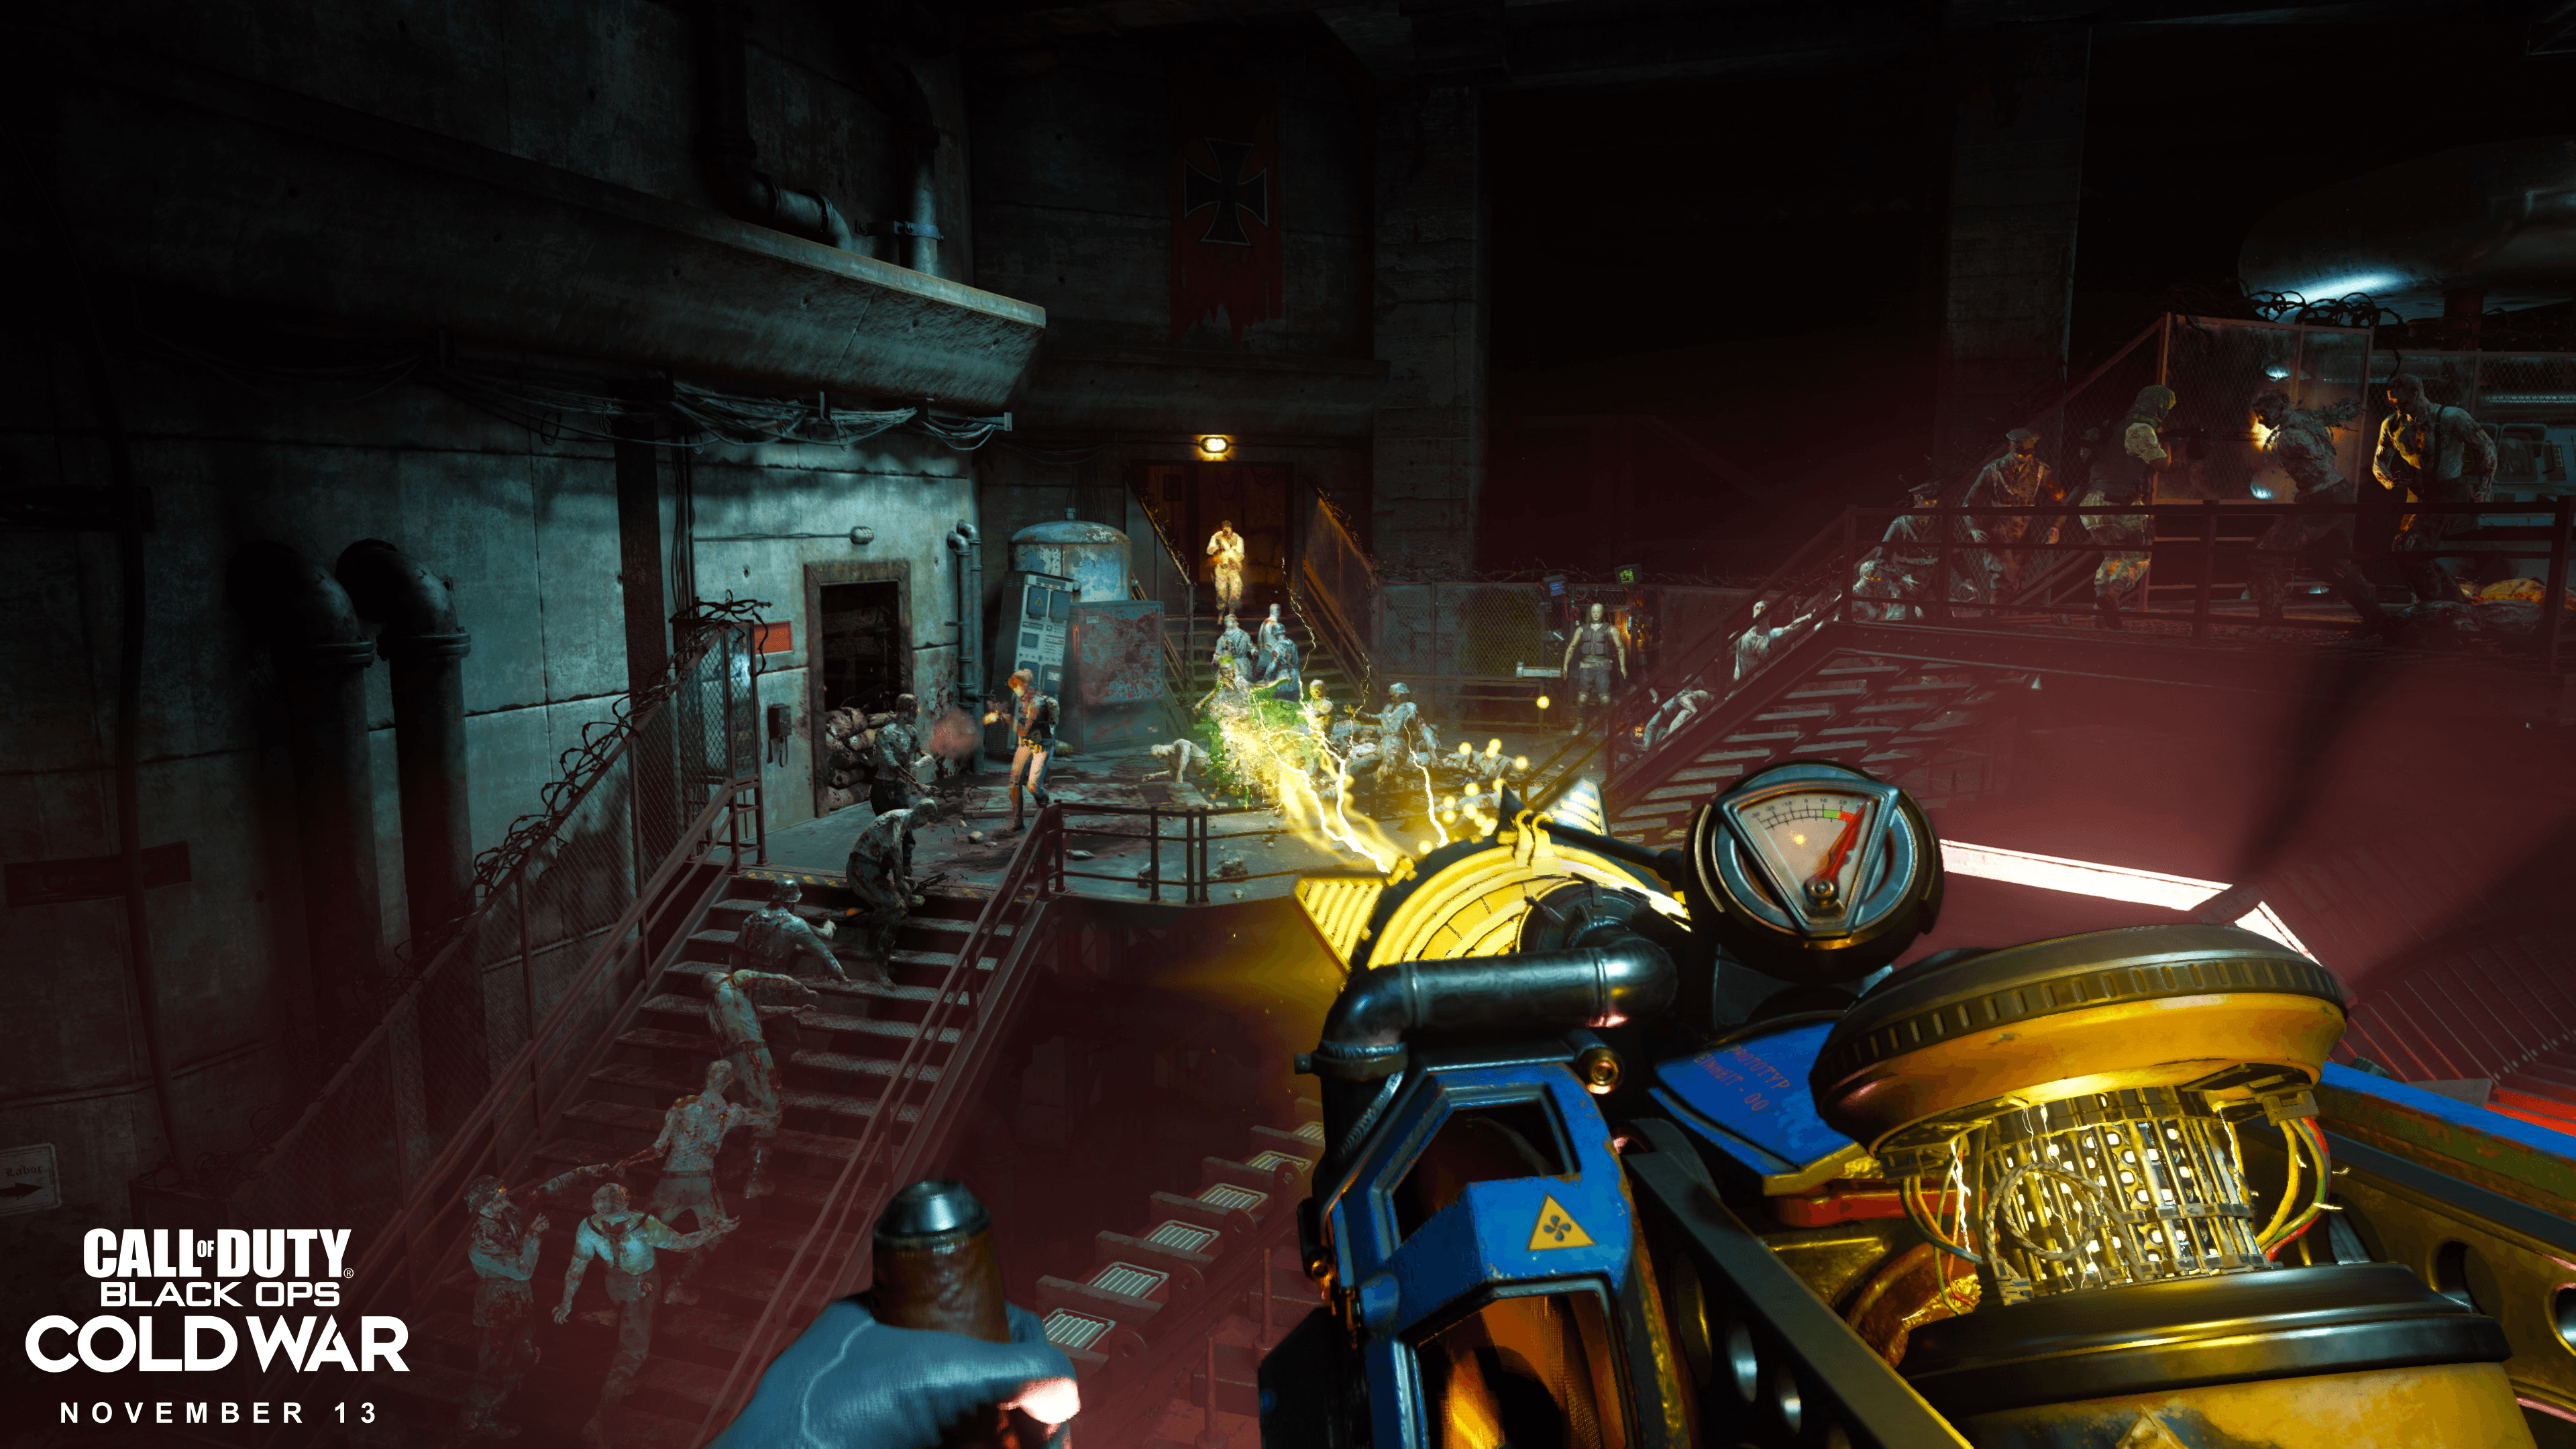 d.i.e shockwave wonder weapon being fired in cold war zombies